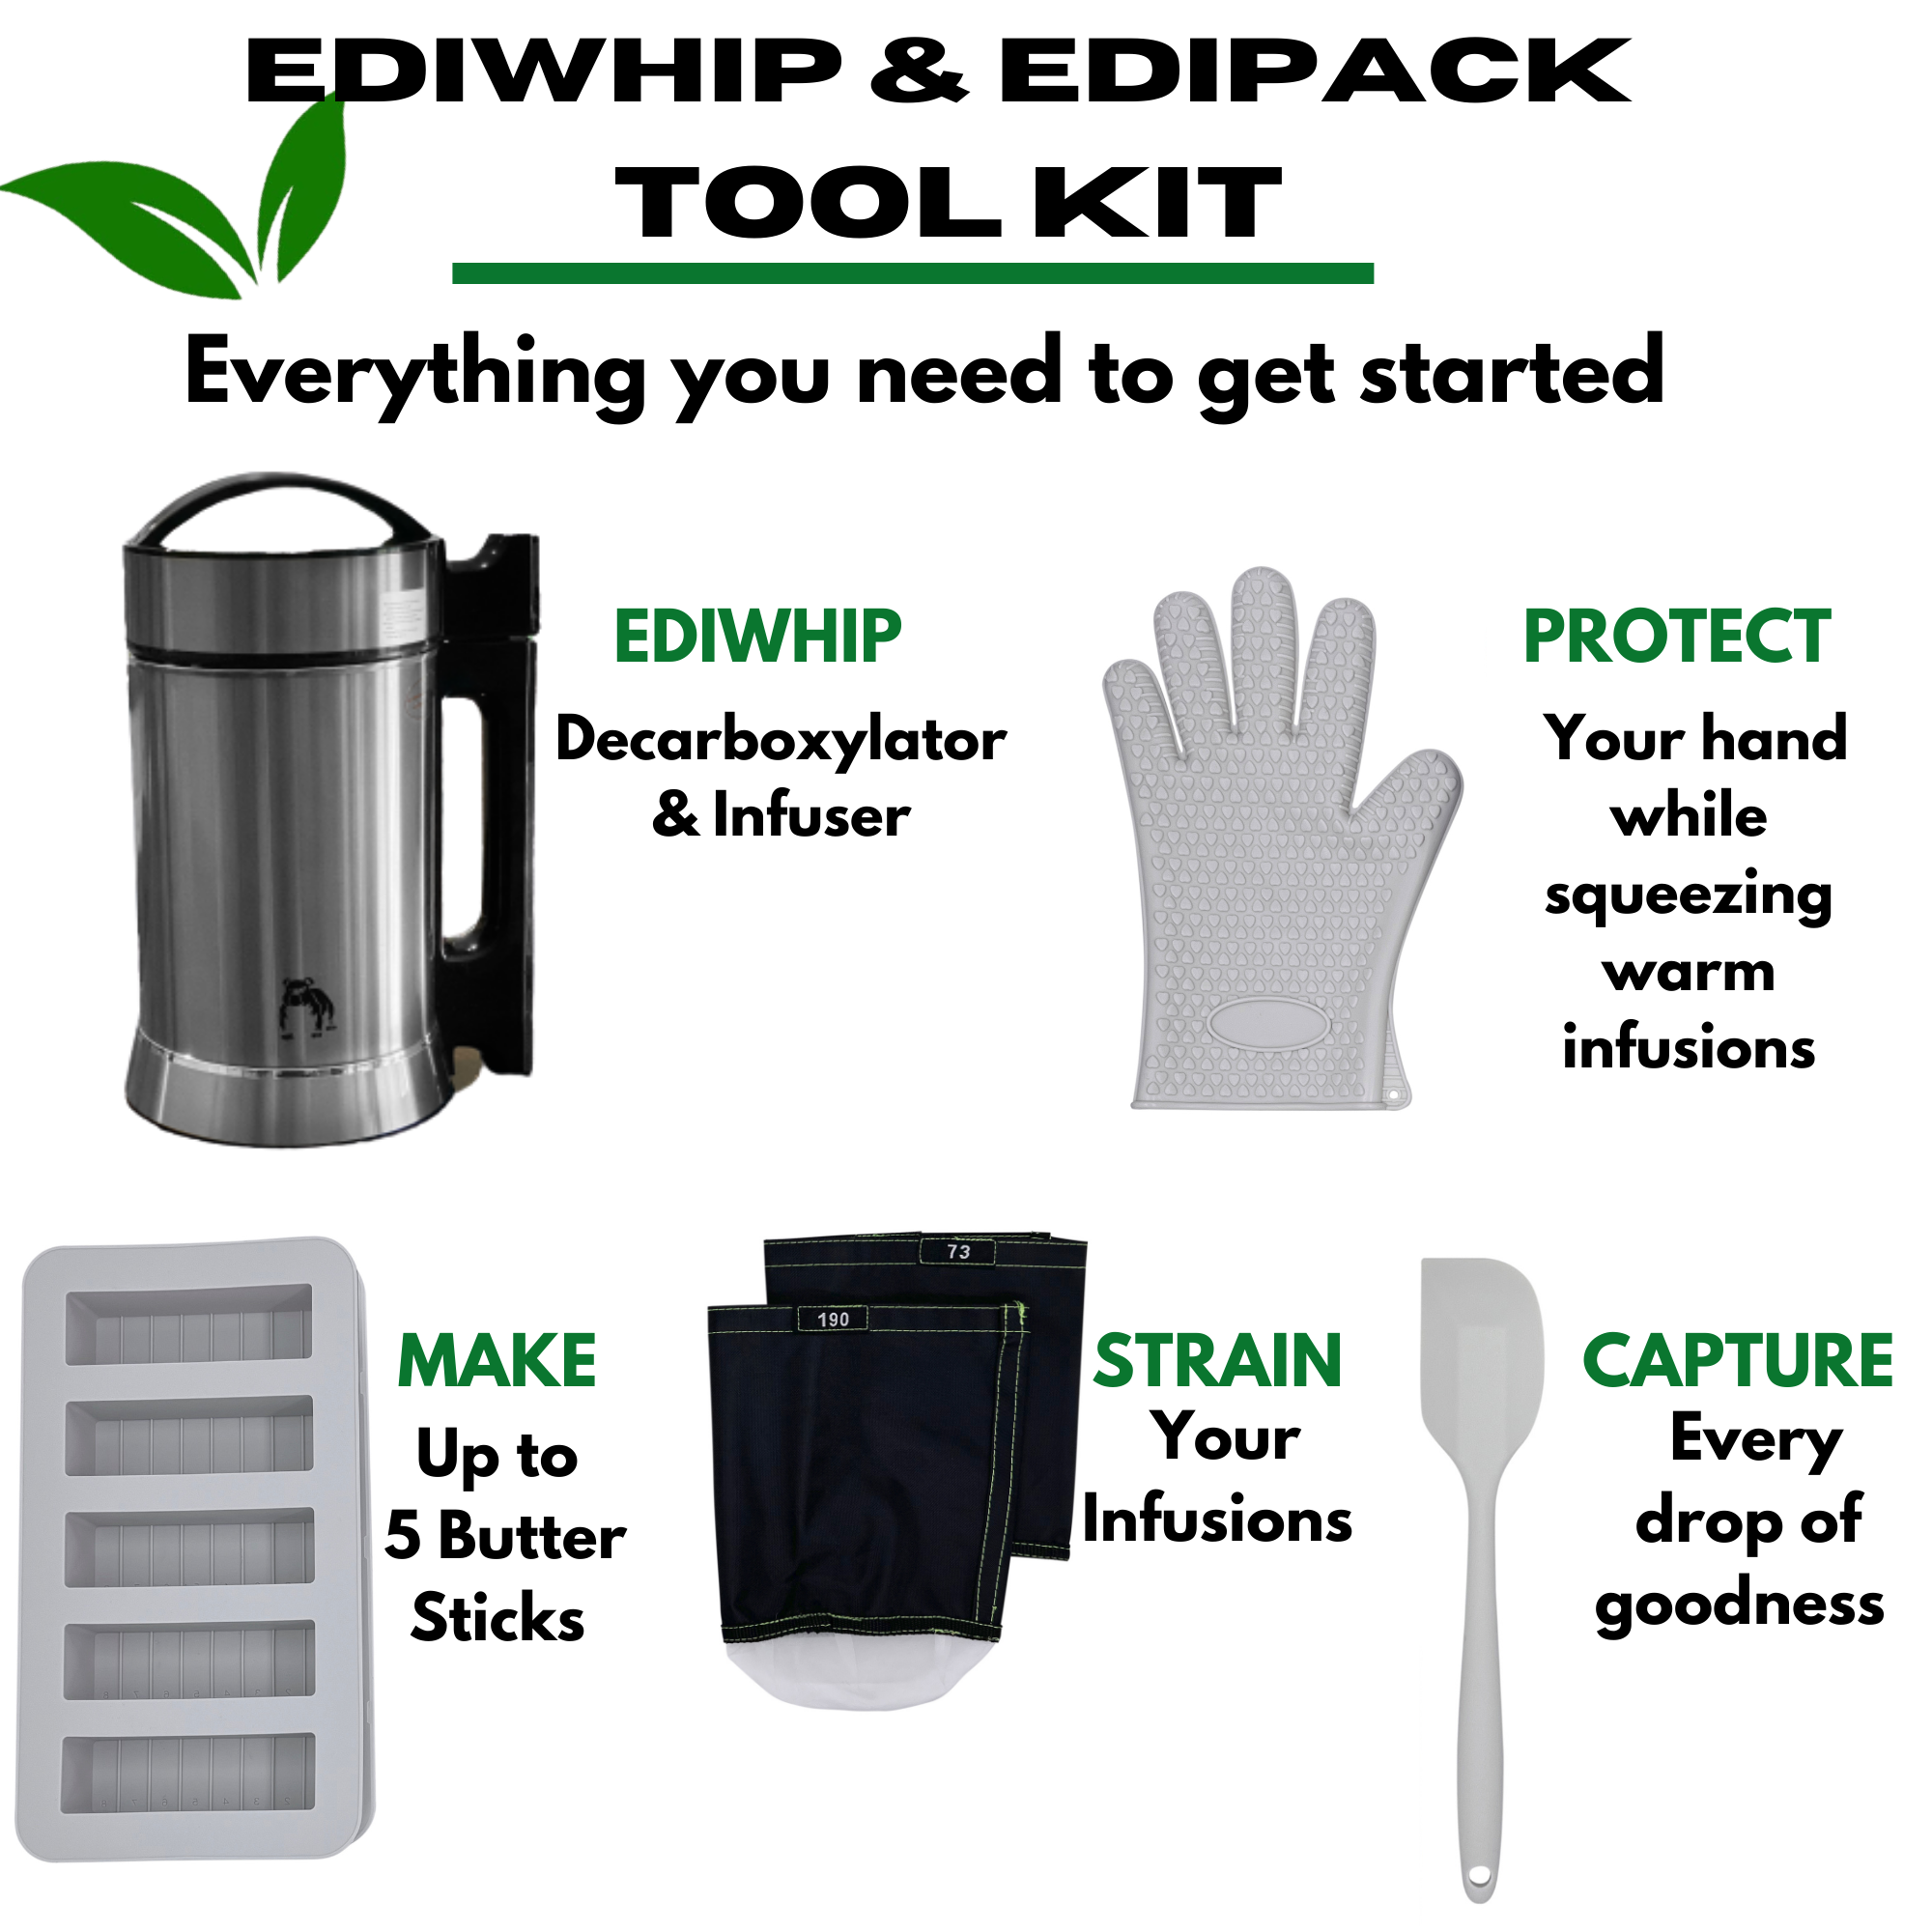 EdiWhip & EdiPack Decarboxylation & Infusion Kit for Cannabis